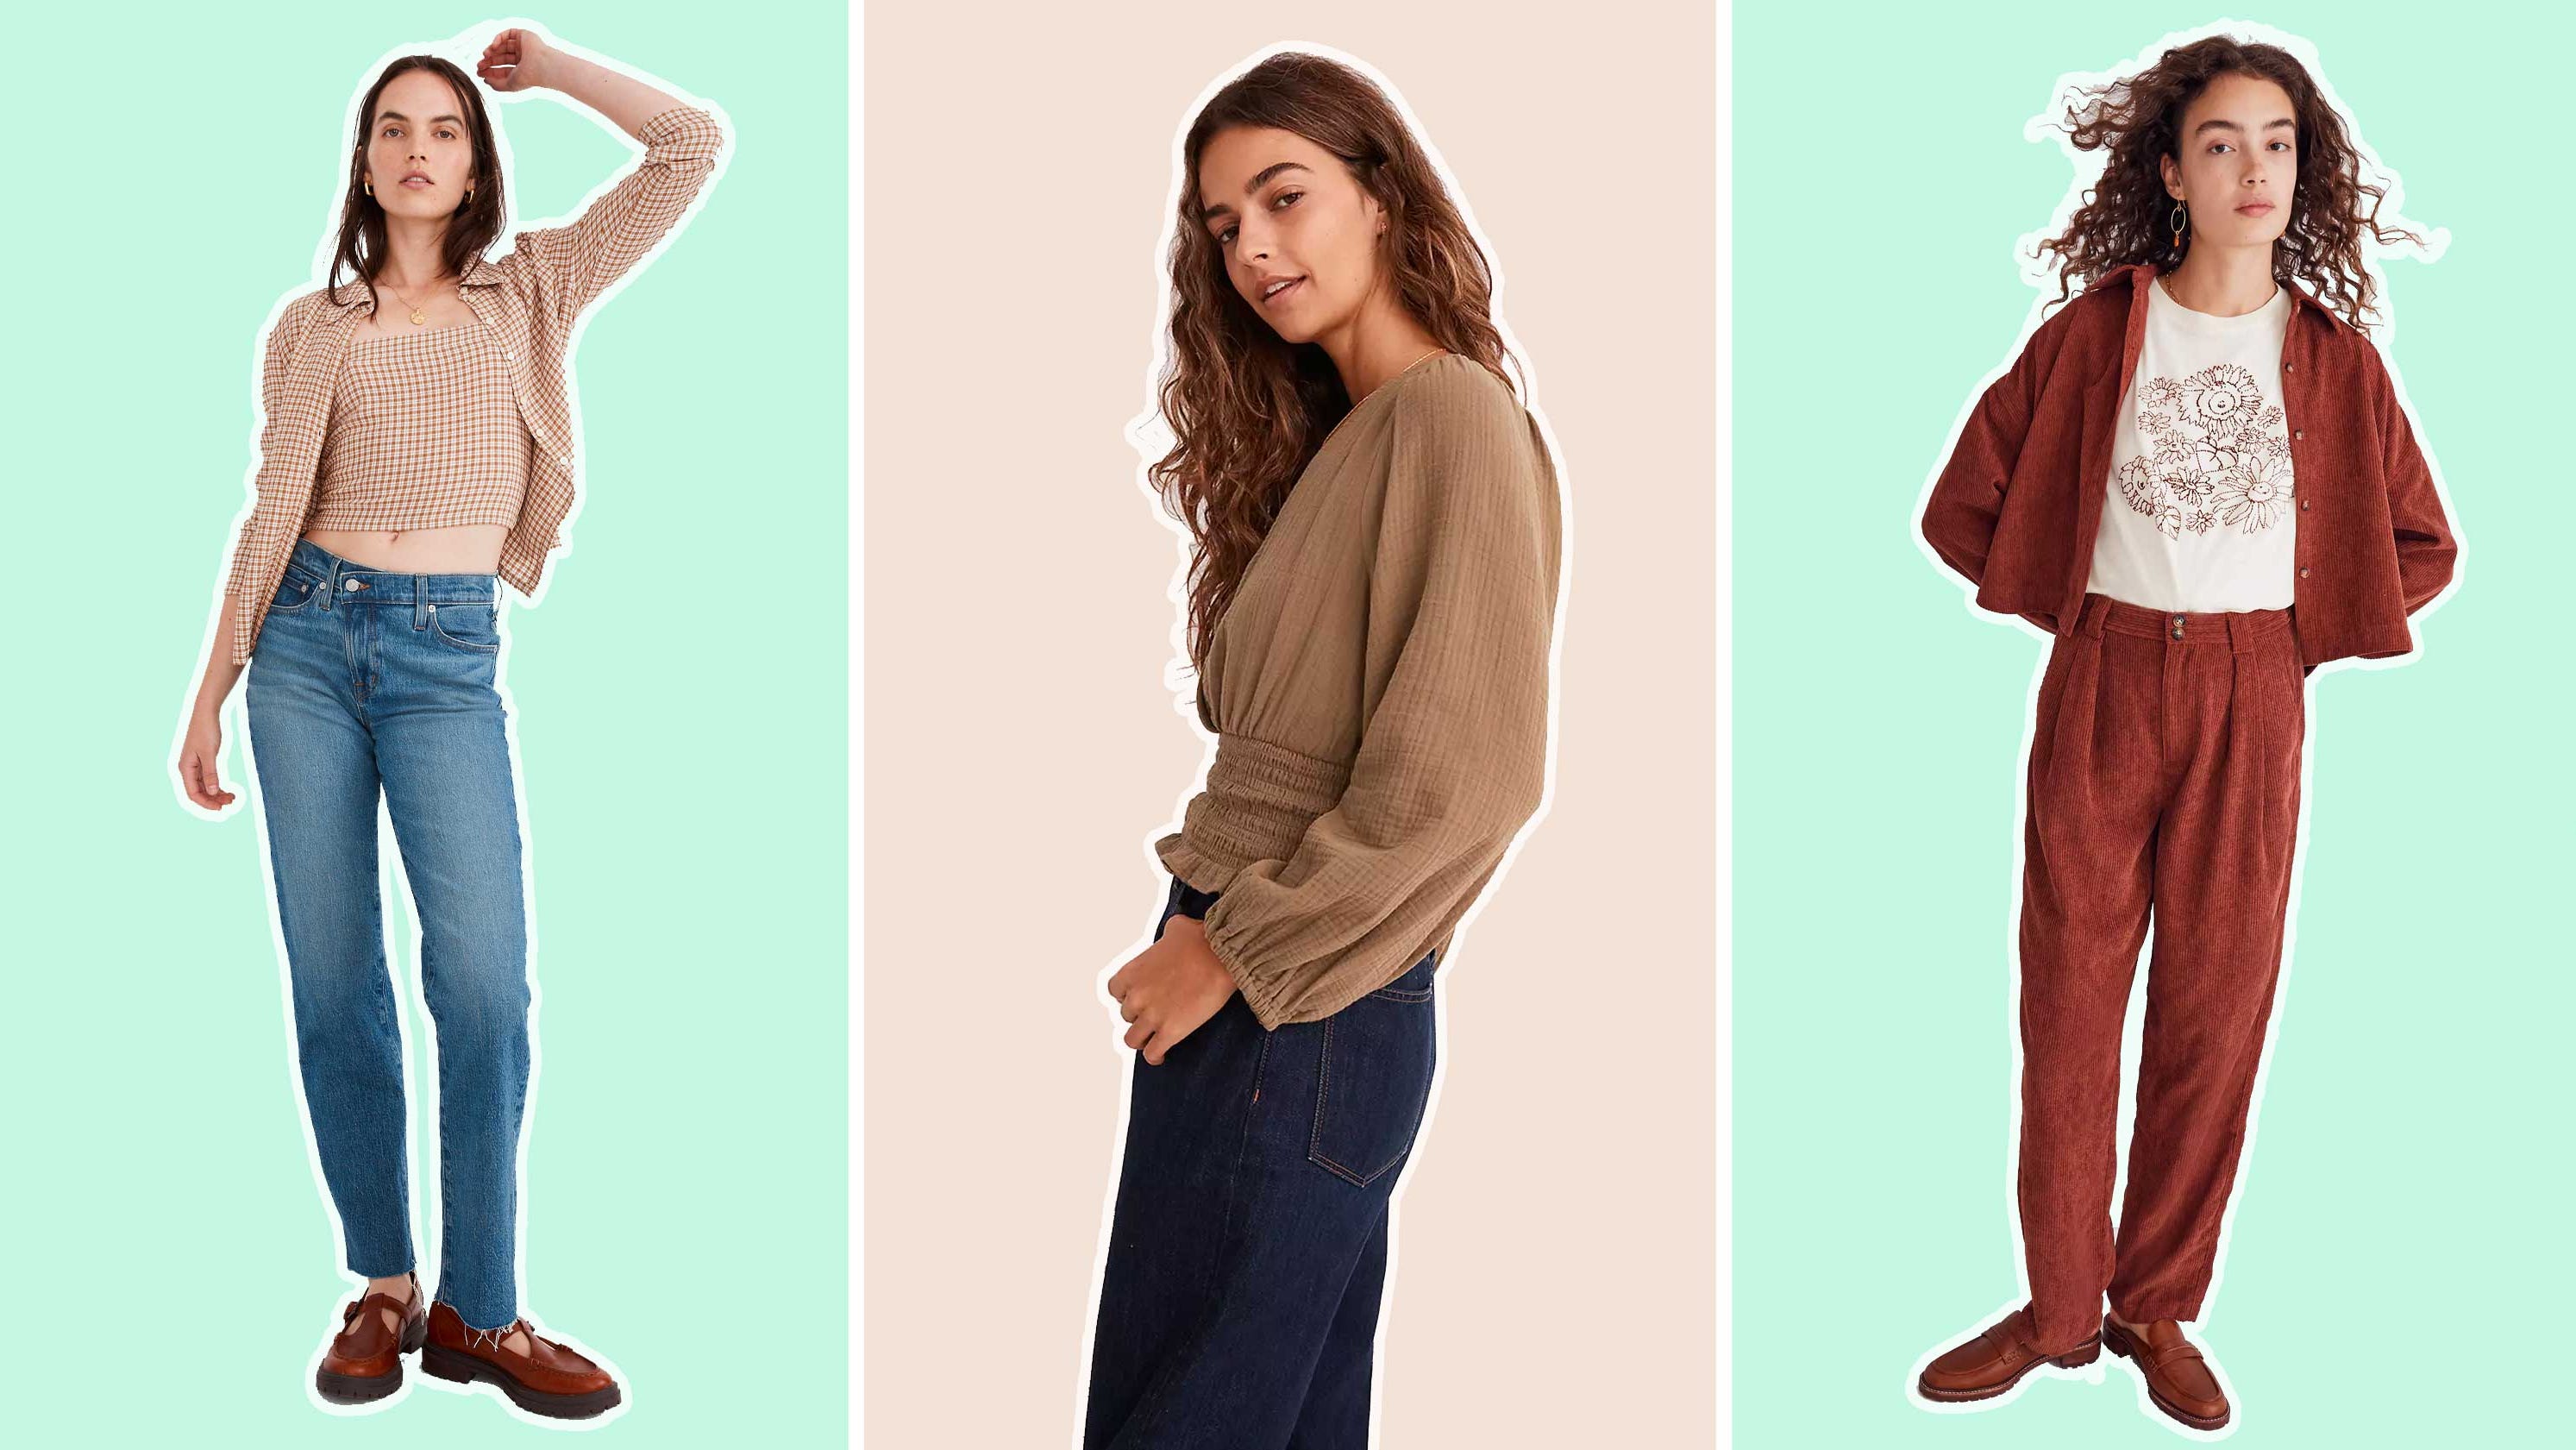 Madewell sale: Get an extra 50% off Madewell jeans, dresses and shirts